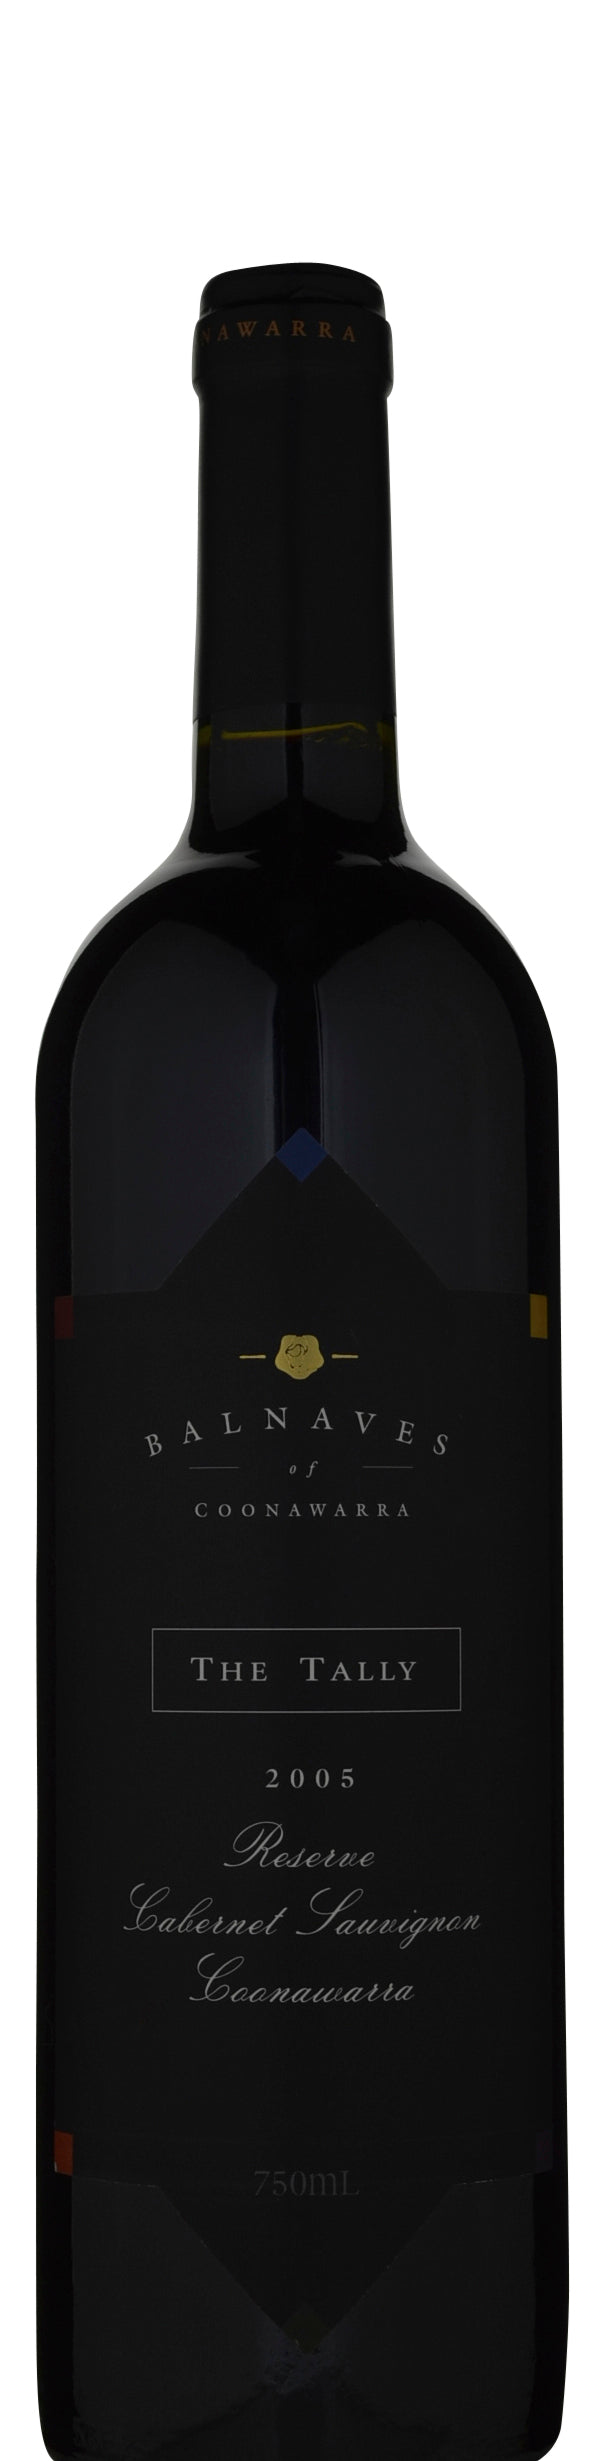 Balnaves of Coonawarra The Tally Reserve Cabernet Sauvignon 2005